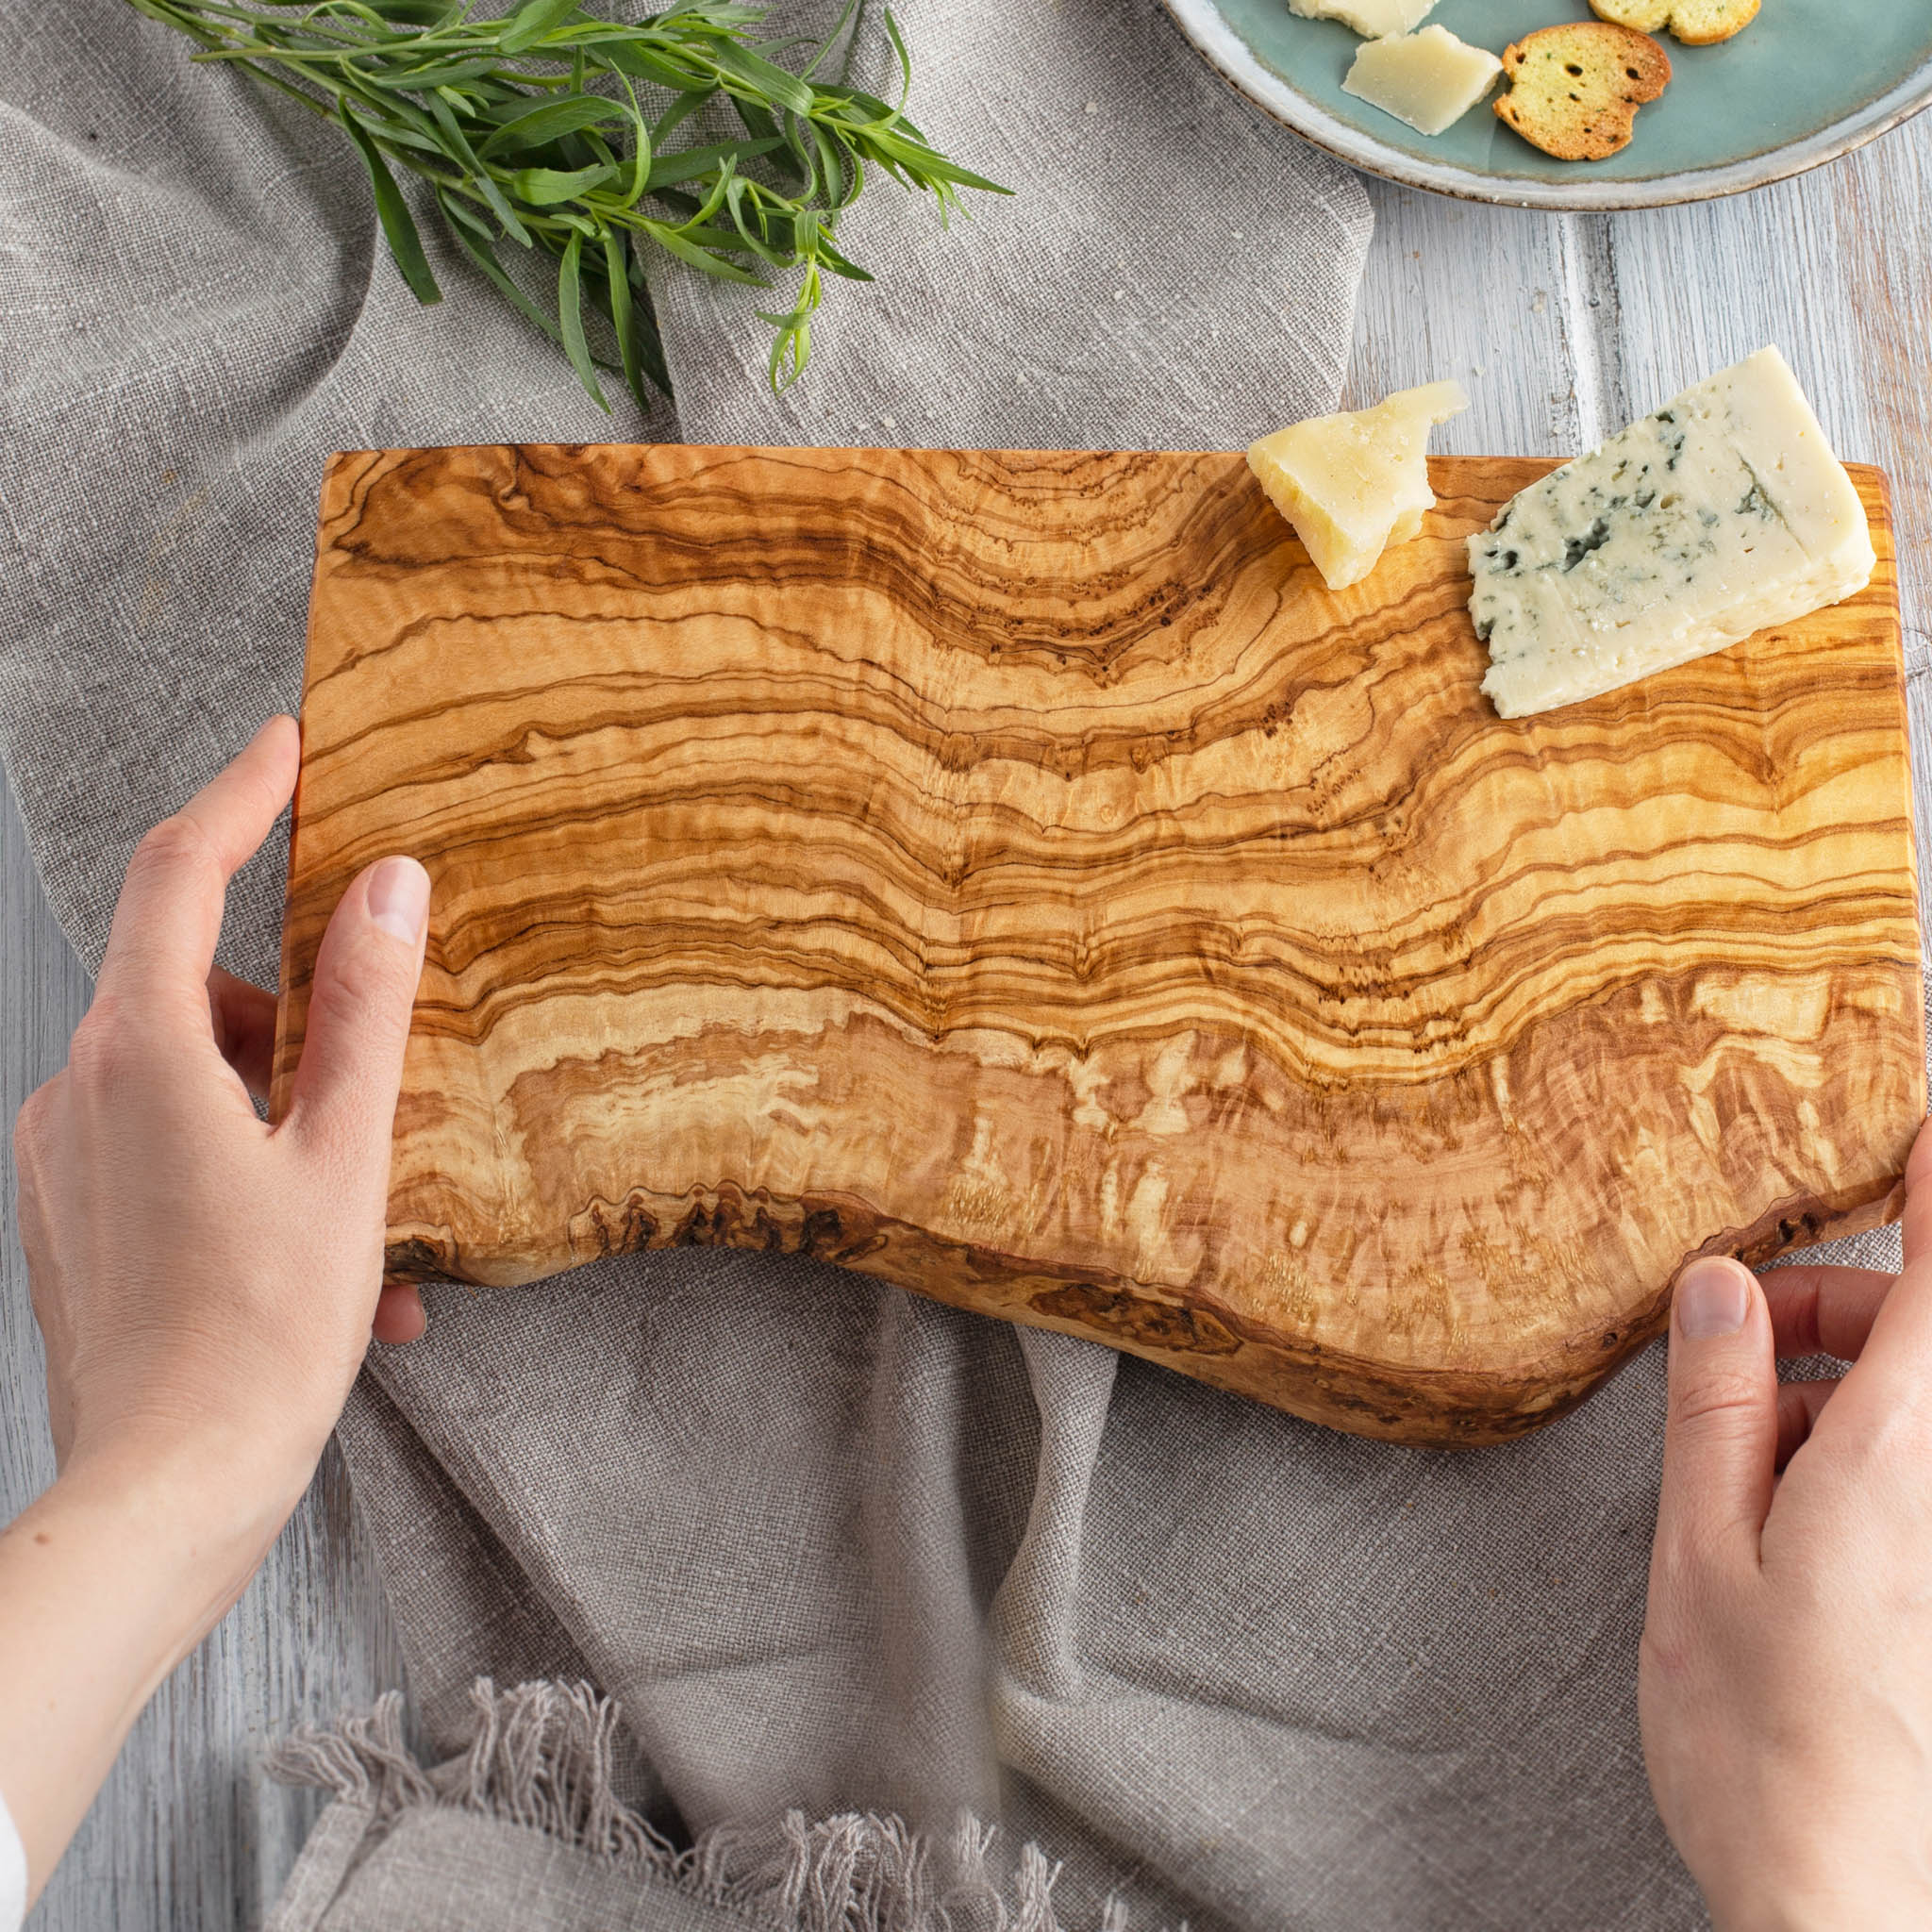 Extra Large Cutting Boards for Kitchen in Olive Wood, Charcuterie Board  Wooden Large 